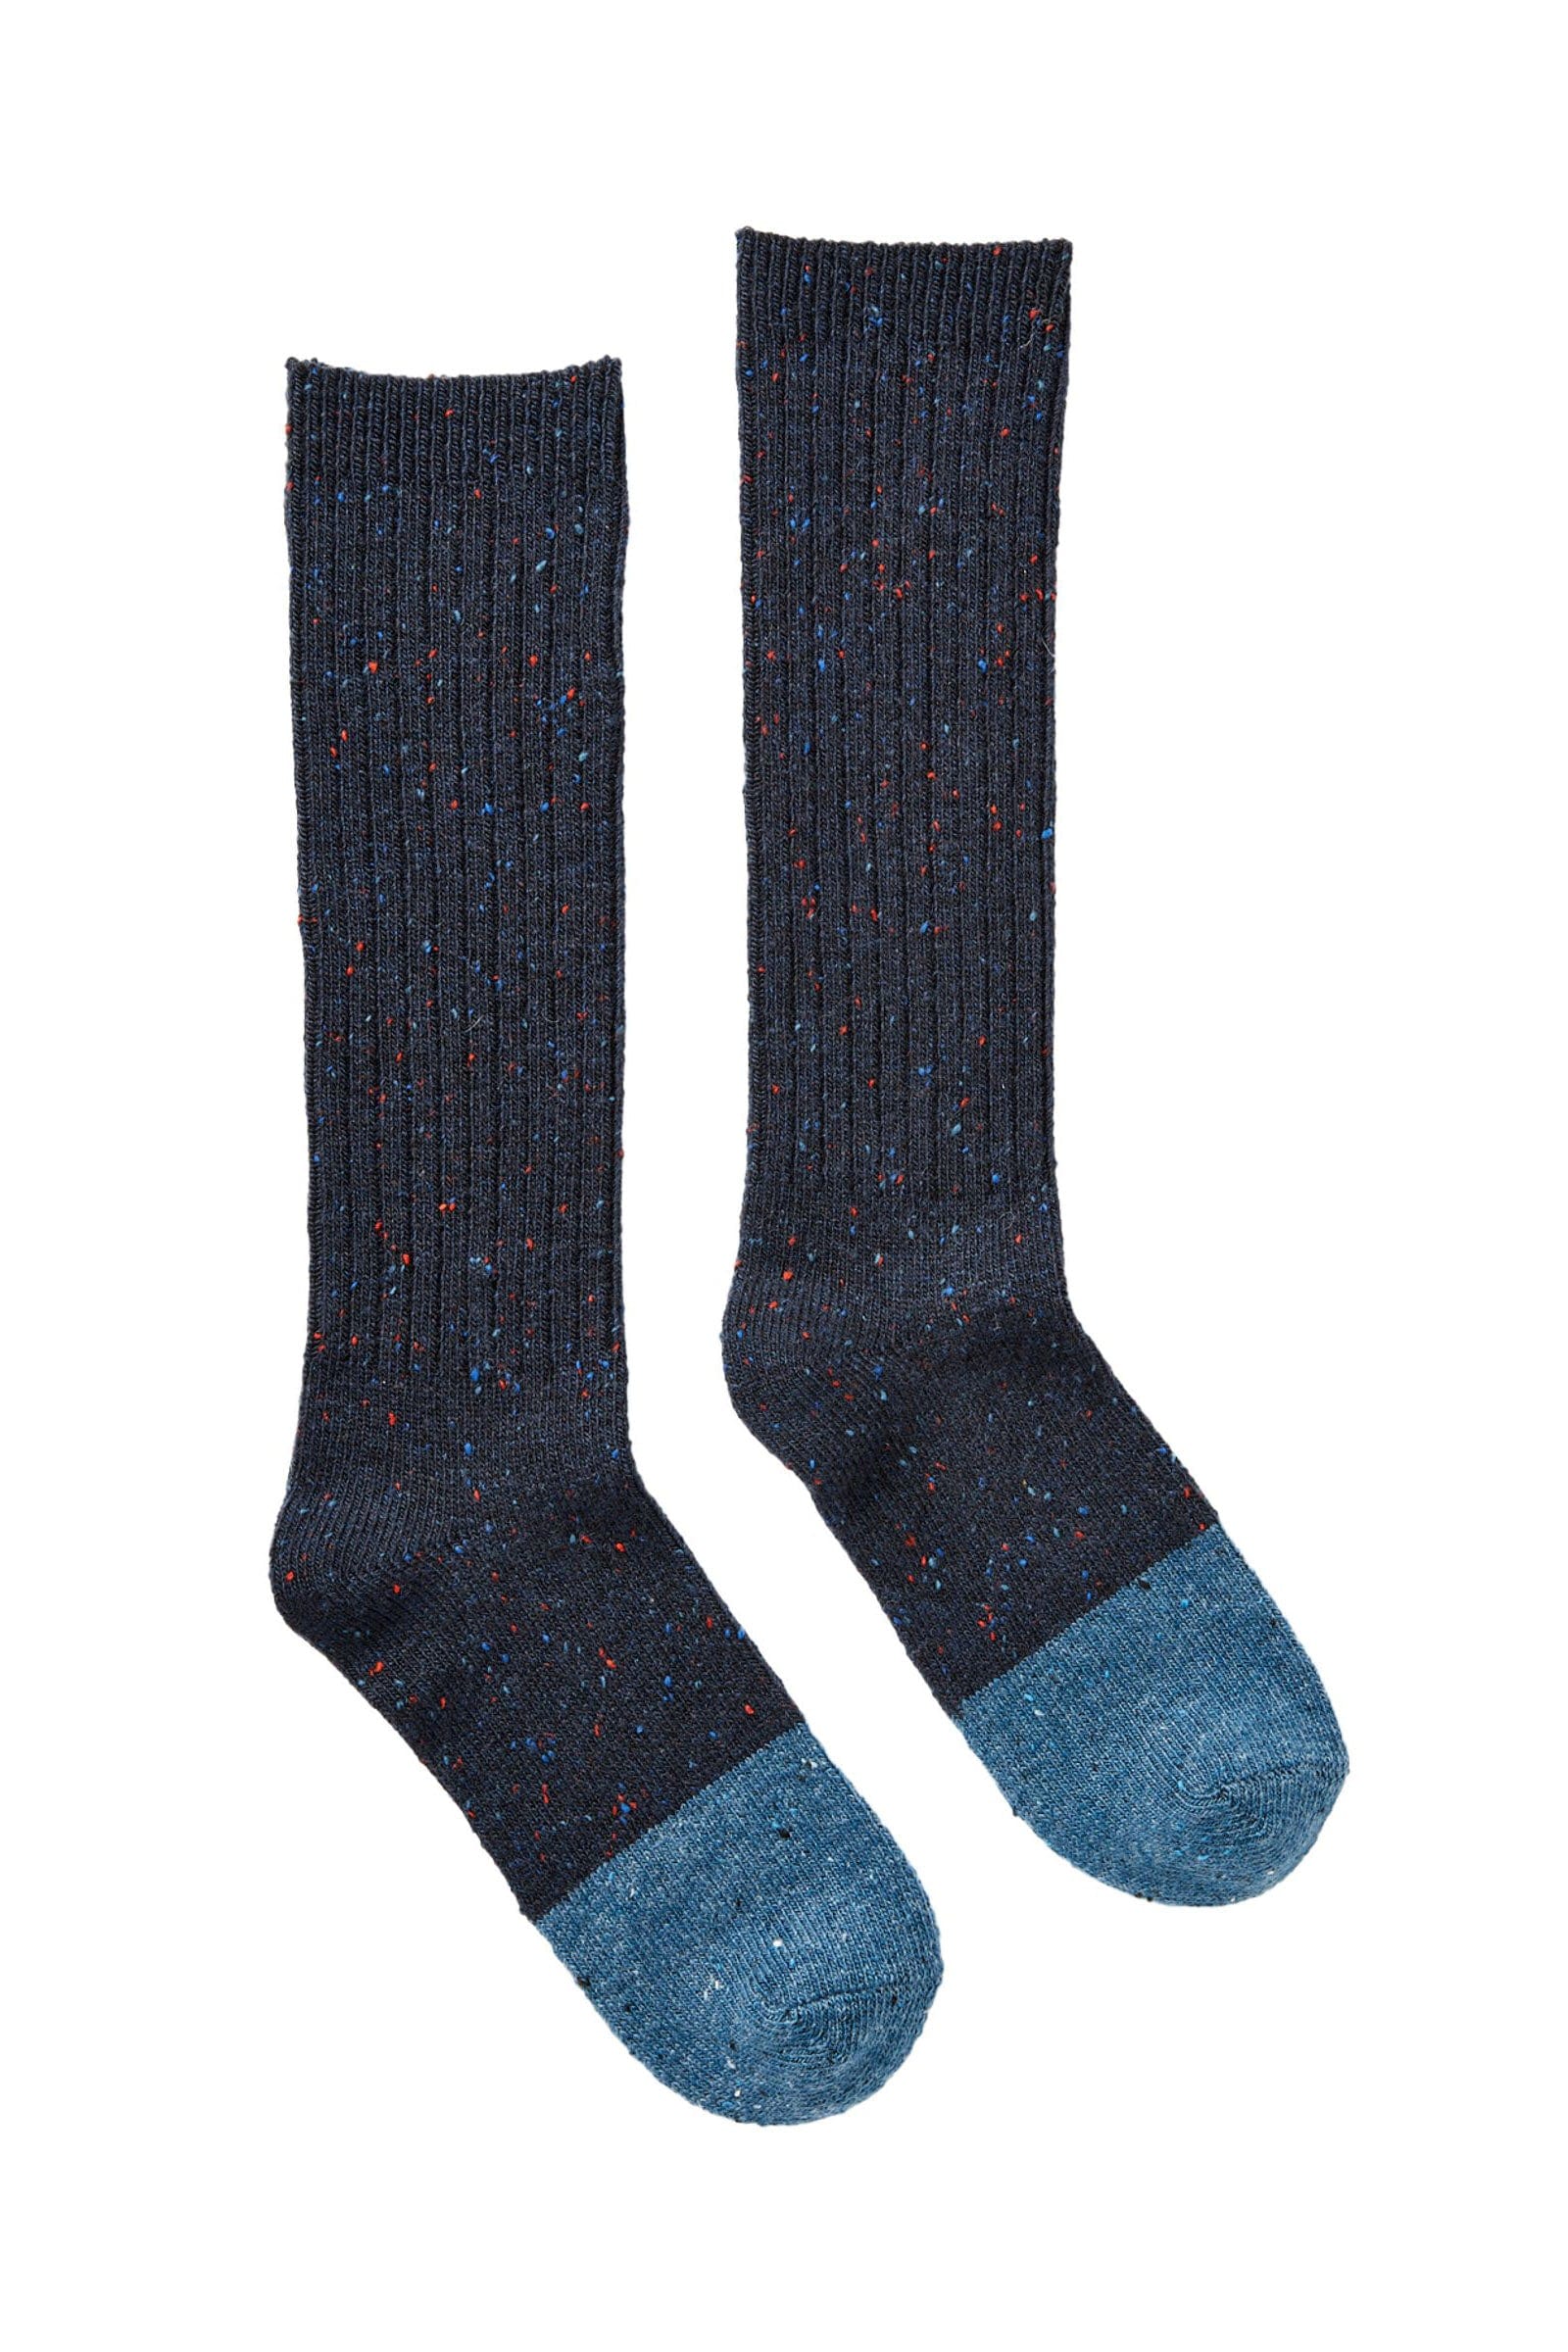 Joules Colourblock Wool Blend Boot Sock - French Navy 222518_FRNAVY_4-8